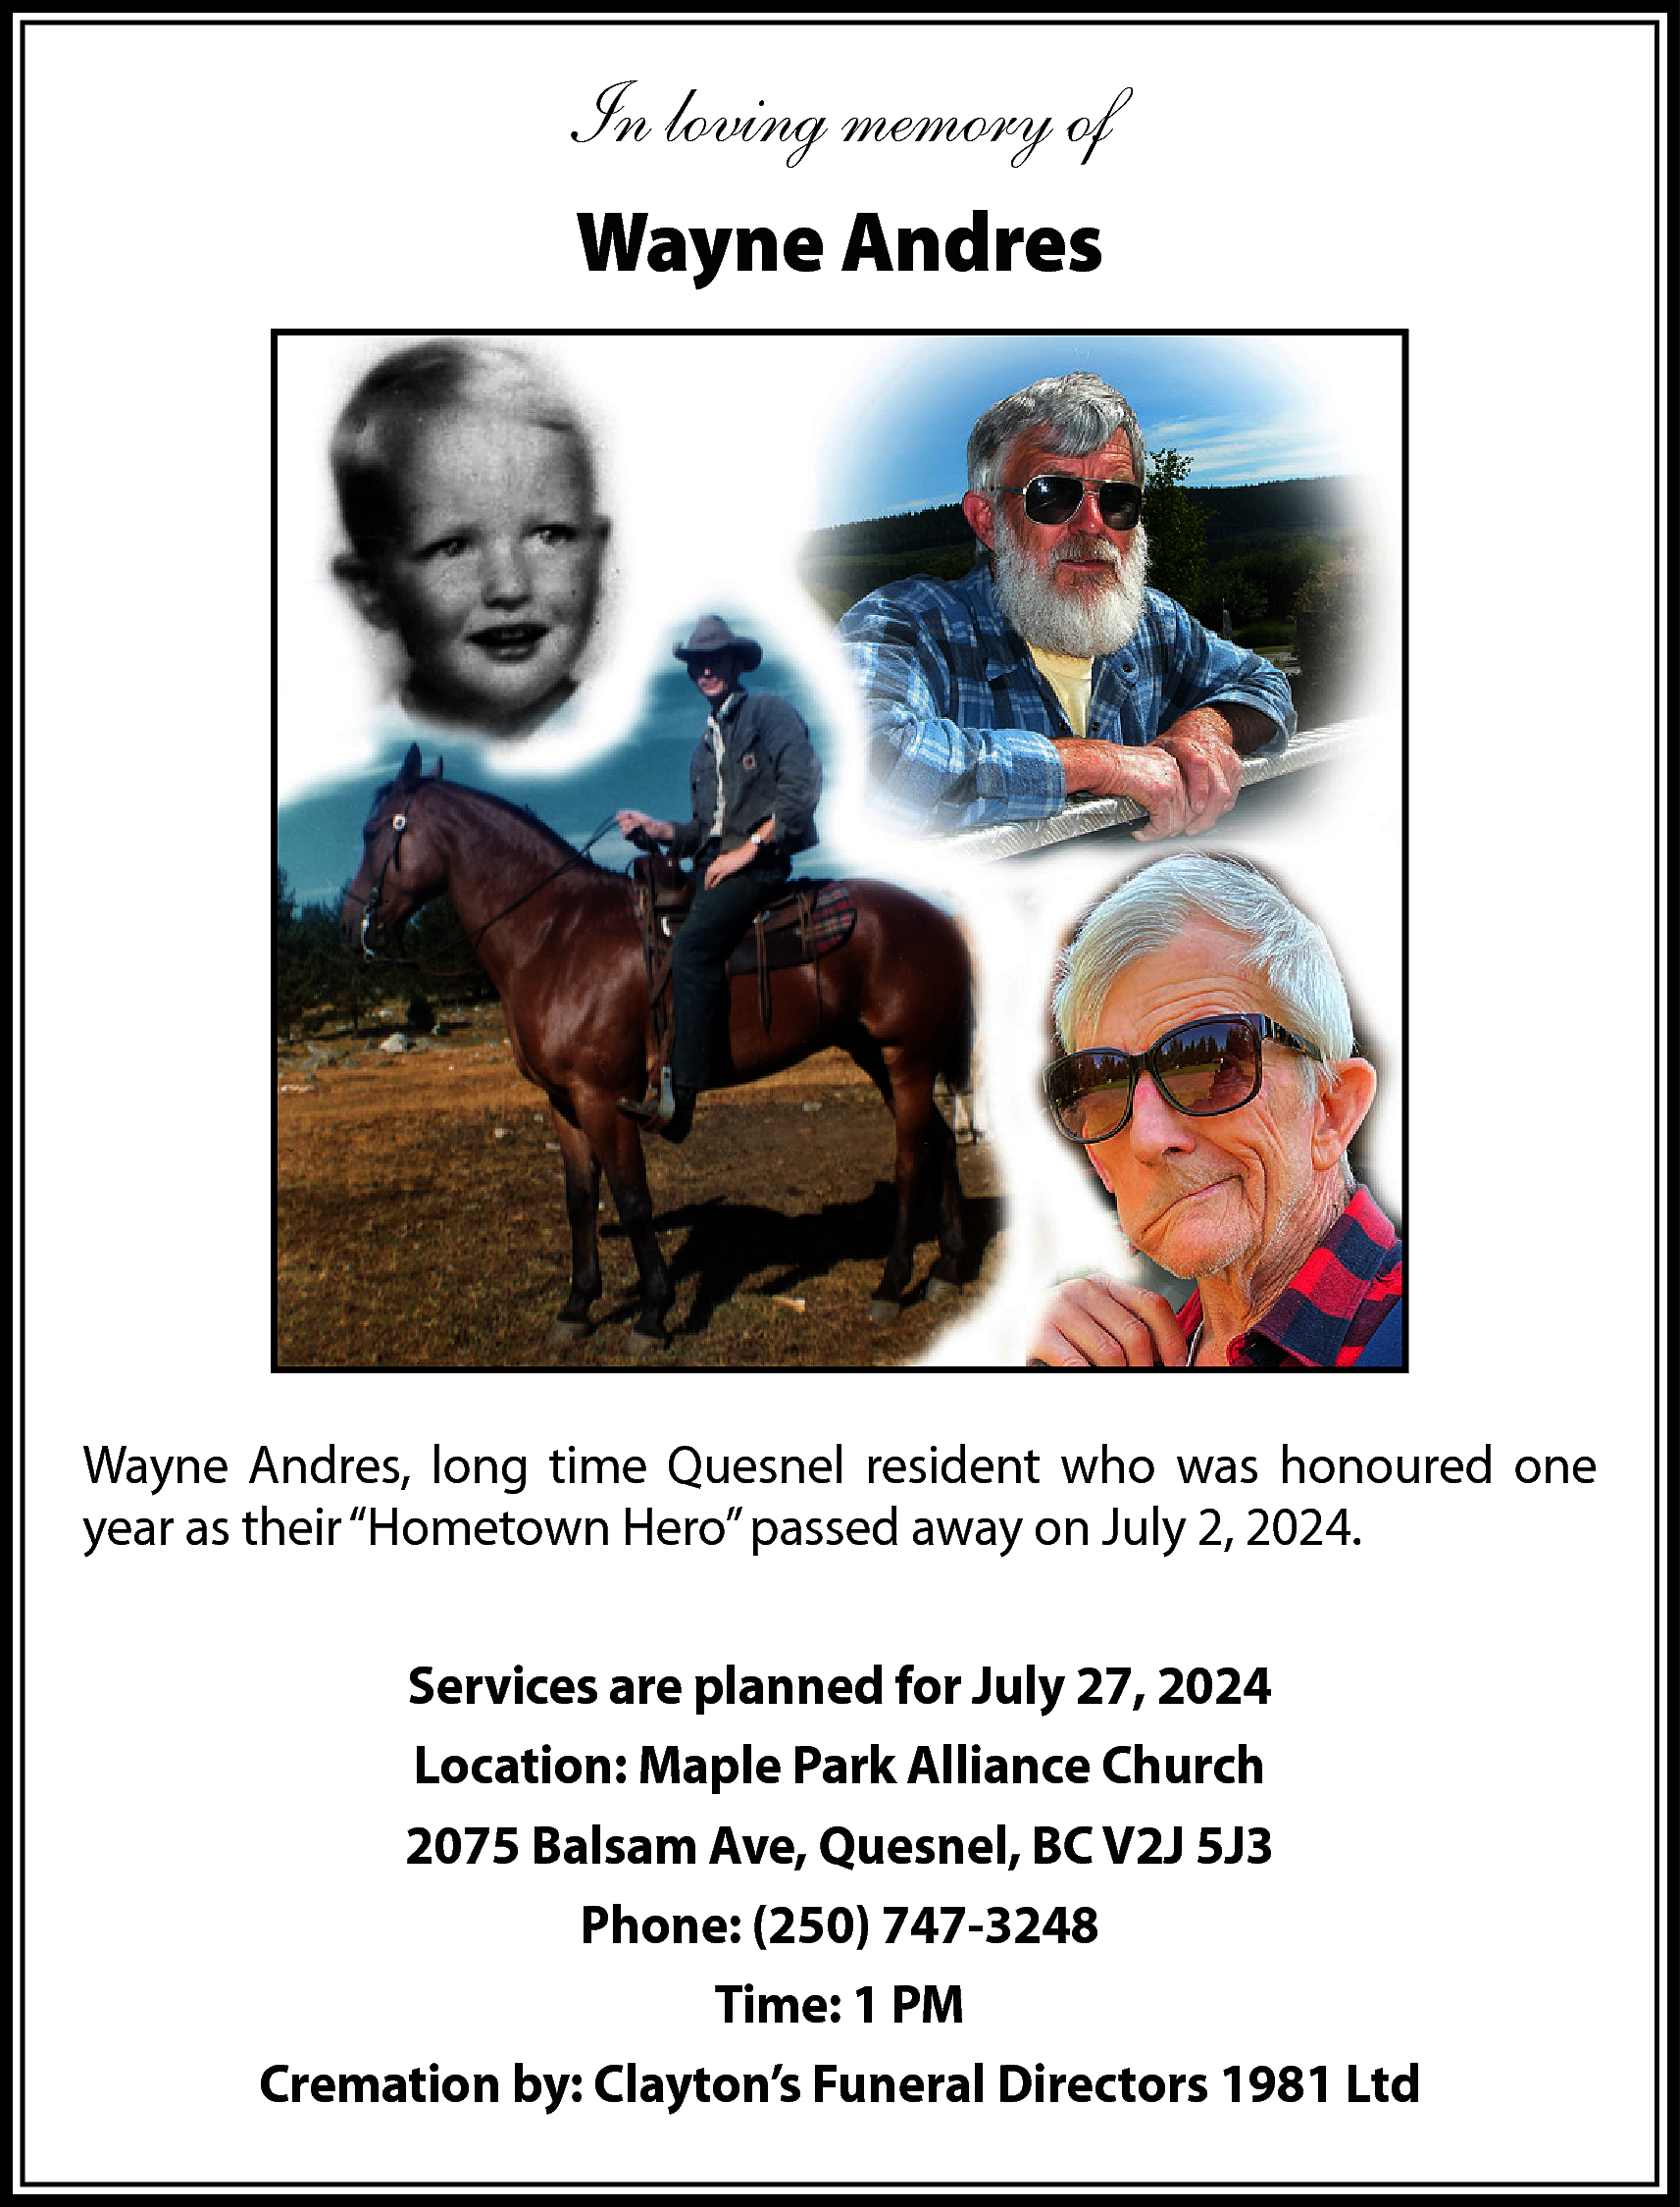 In loving memory of <br>Wayne  In loving memory of  Wayne Andres    Wayne Andres, long time Quesnel resident who was honoured one  year as their “Hometown Hero” passed away on July 2, 2024.  Services are planned for July 27, 2024  Location: Maple Park Alliance Church  2075 Balsam Ave, Quesnel, BC V2J 5J3  Phone: (250) 747-3248  Time: 1 PM  Cremation by: Clayton’s Funeral Directors 1981 Ltd    